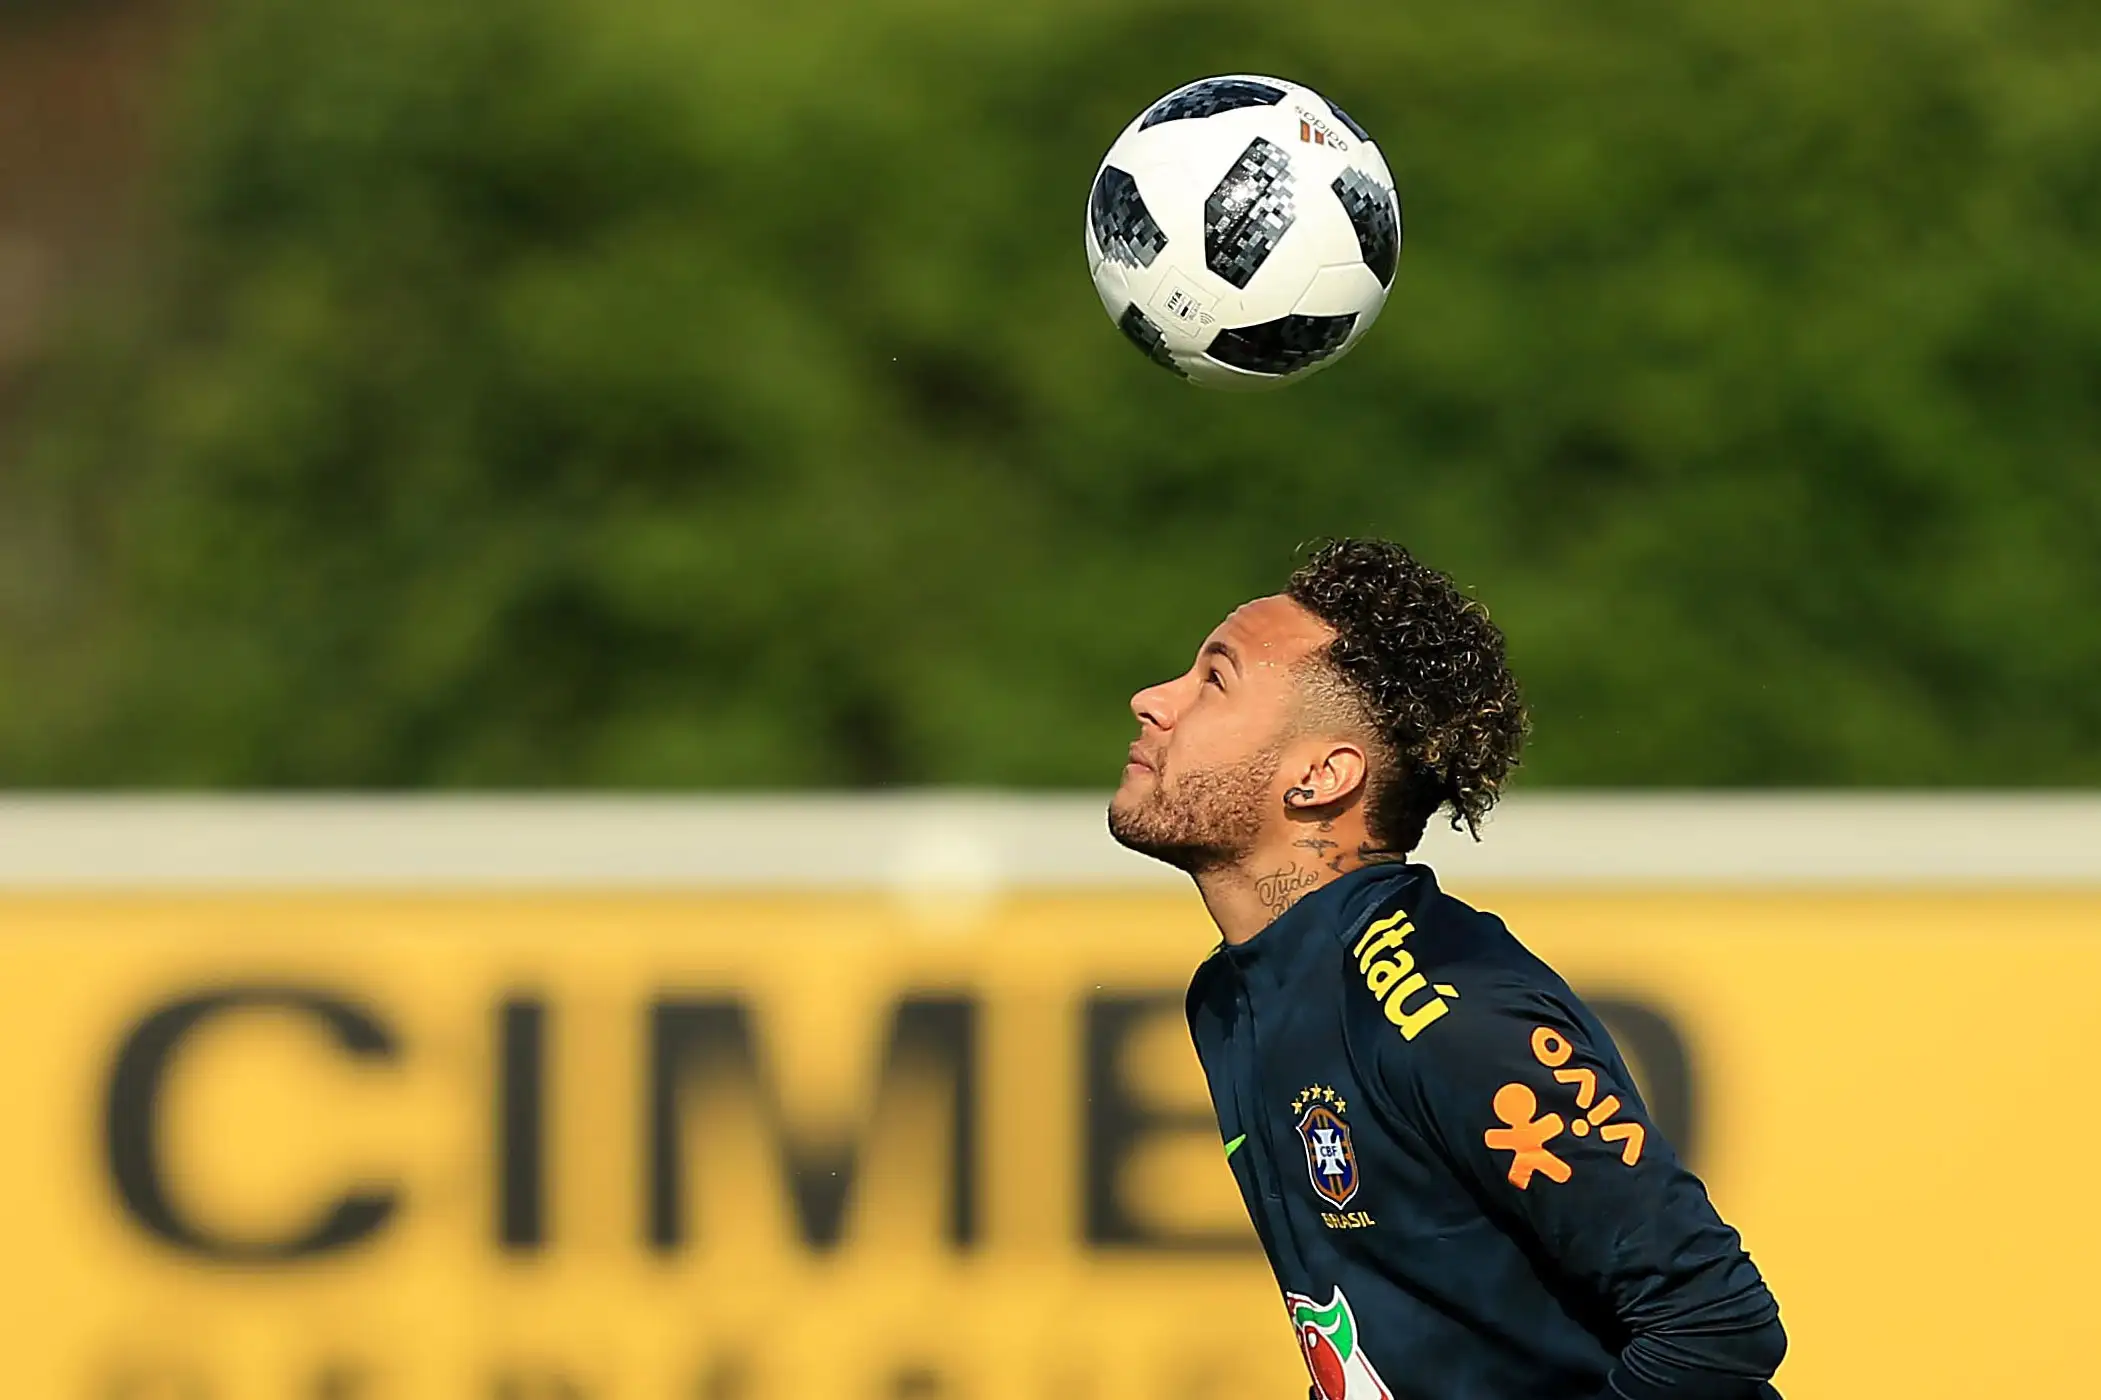 Neymar Jr of Brazil during a Brazil Training Session at Tottenham Hotspur Training Centre on May 28, 2018 in Enfield, England.